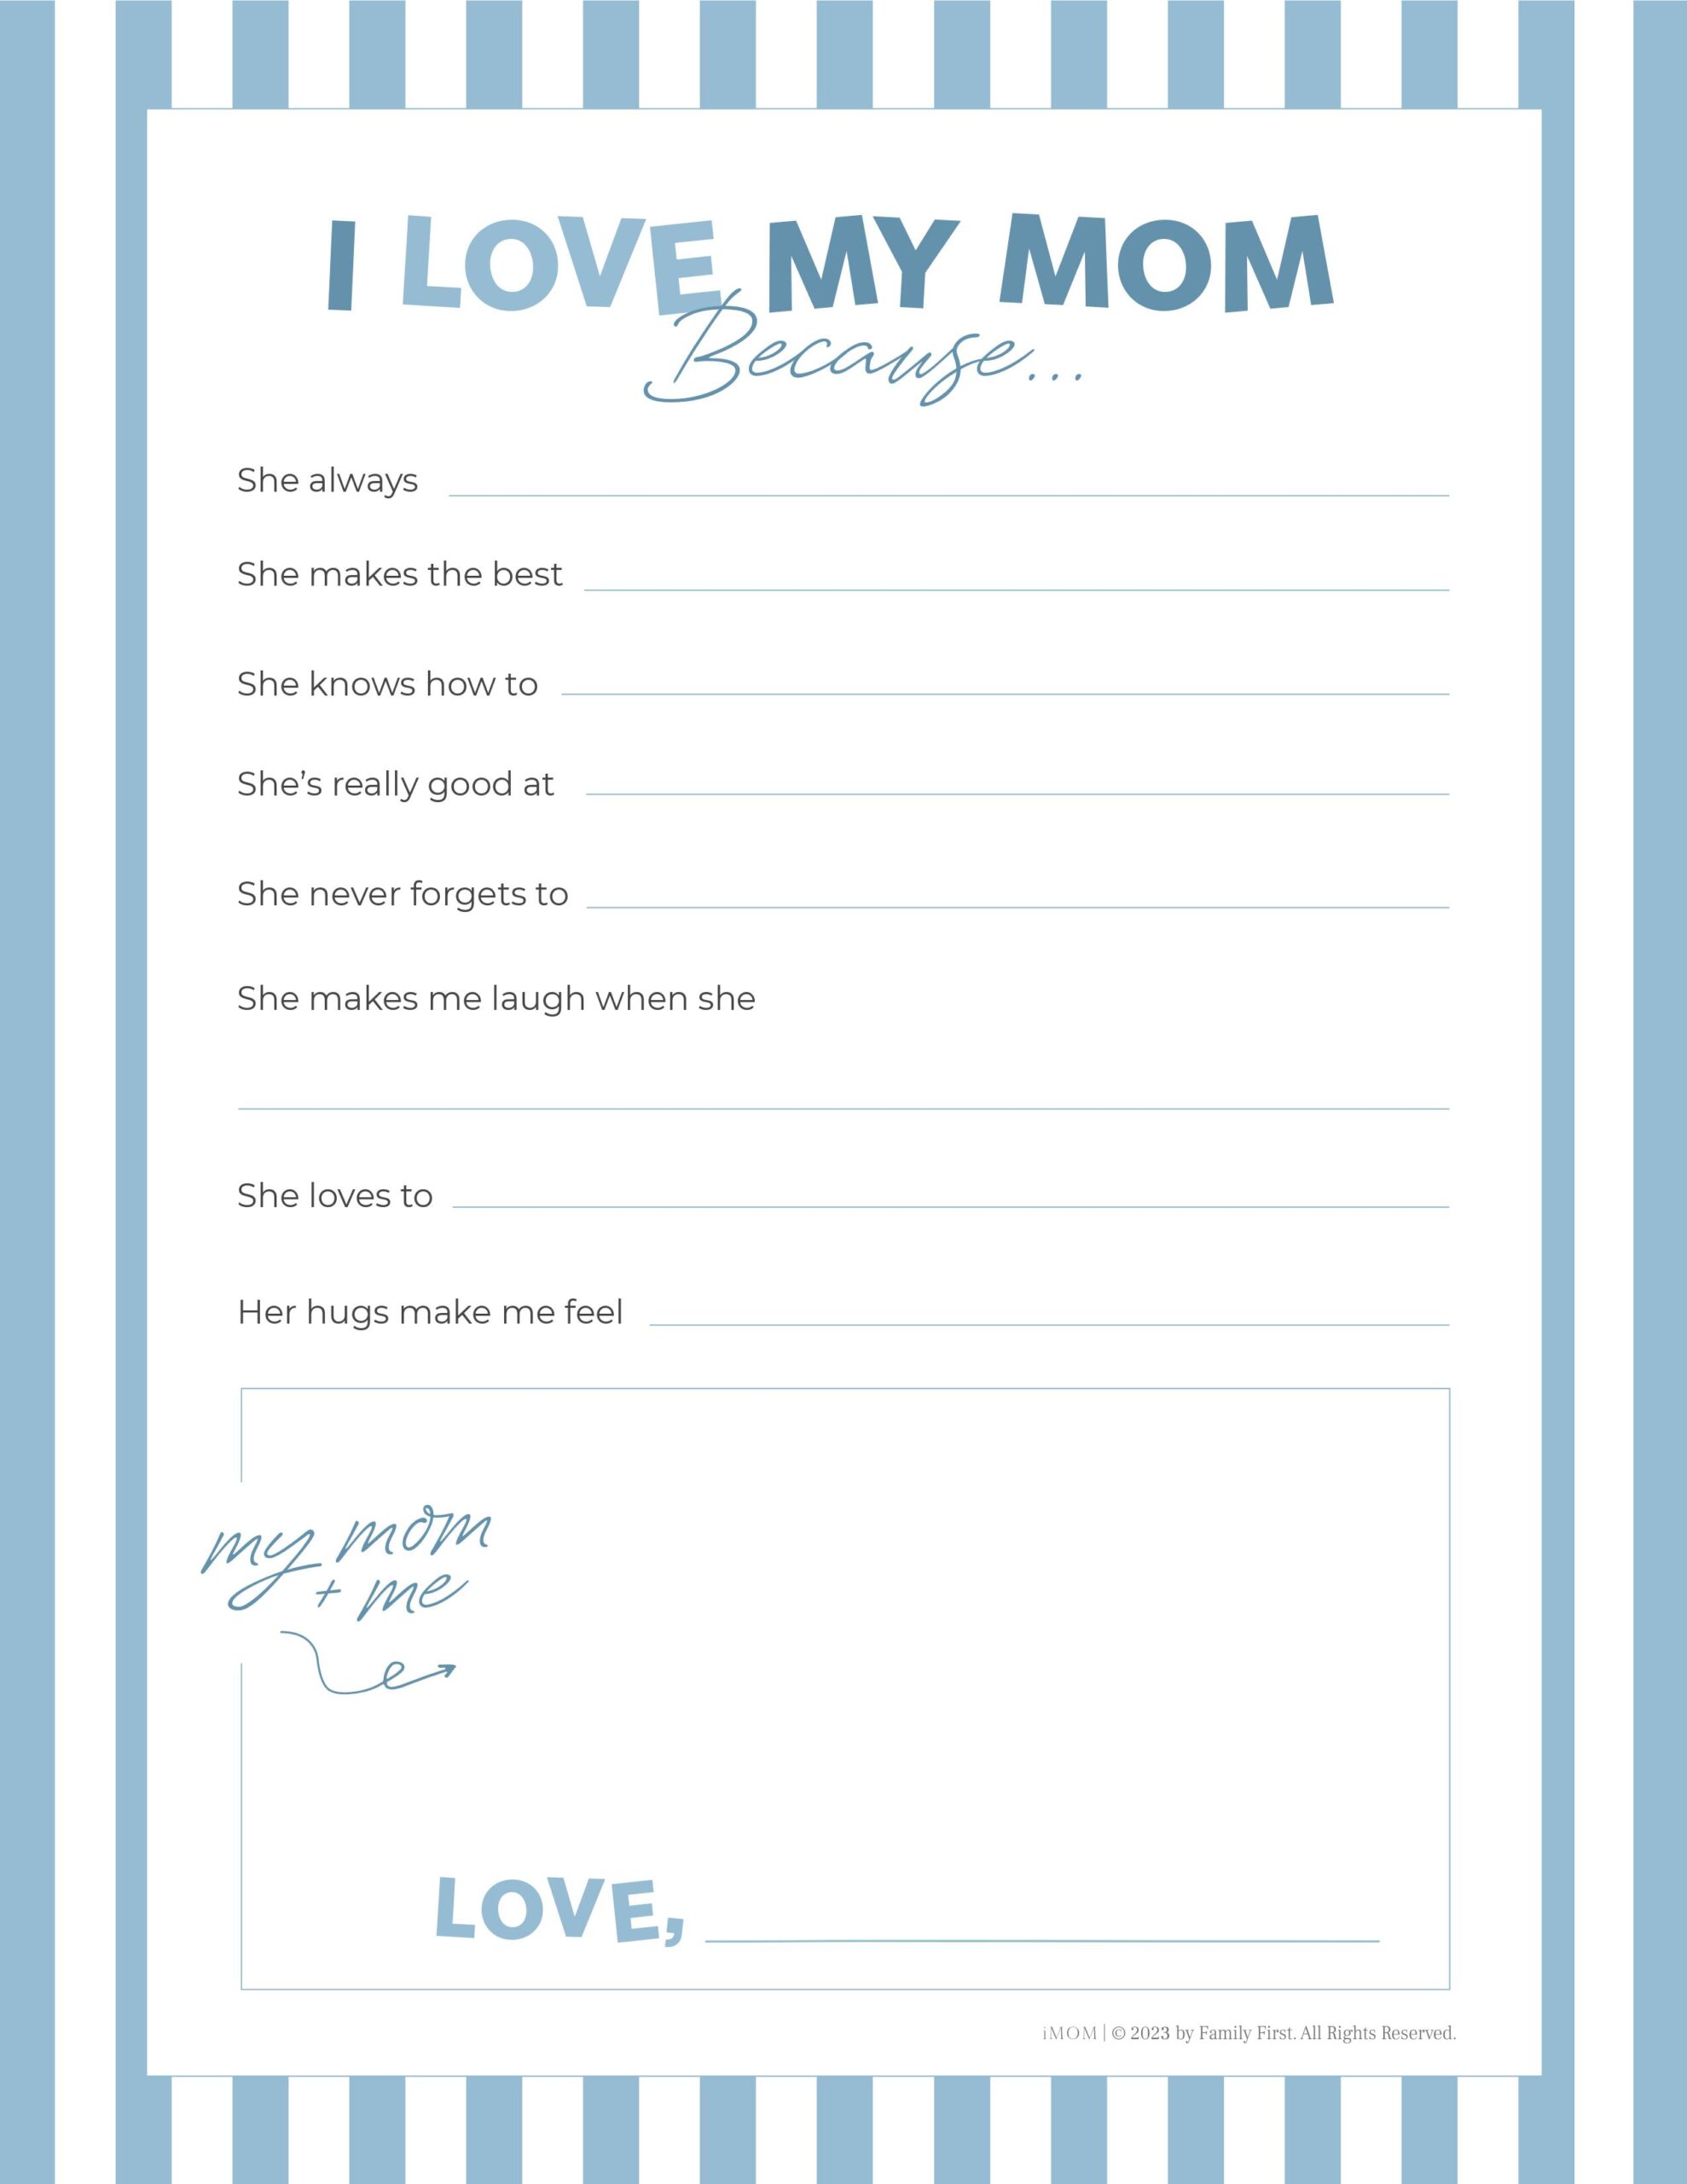 What I Love About You Mom by Questions About Me